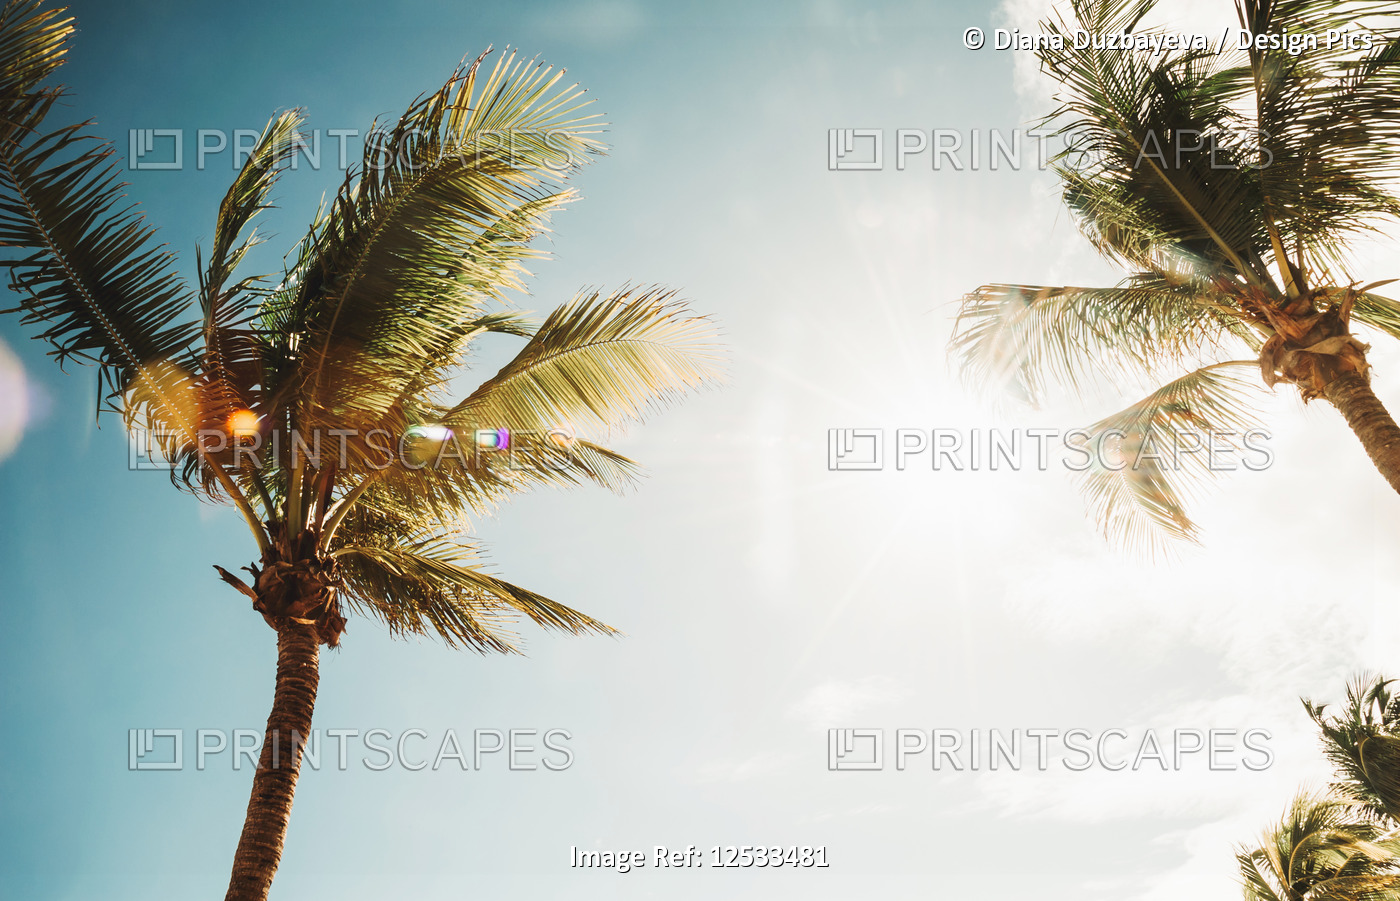 Low angle view of palm trees against a blue sky illuminated by sunlight; Mexico